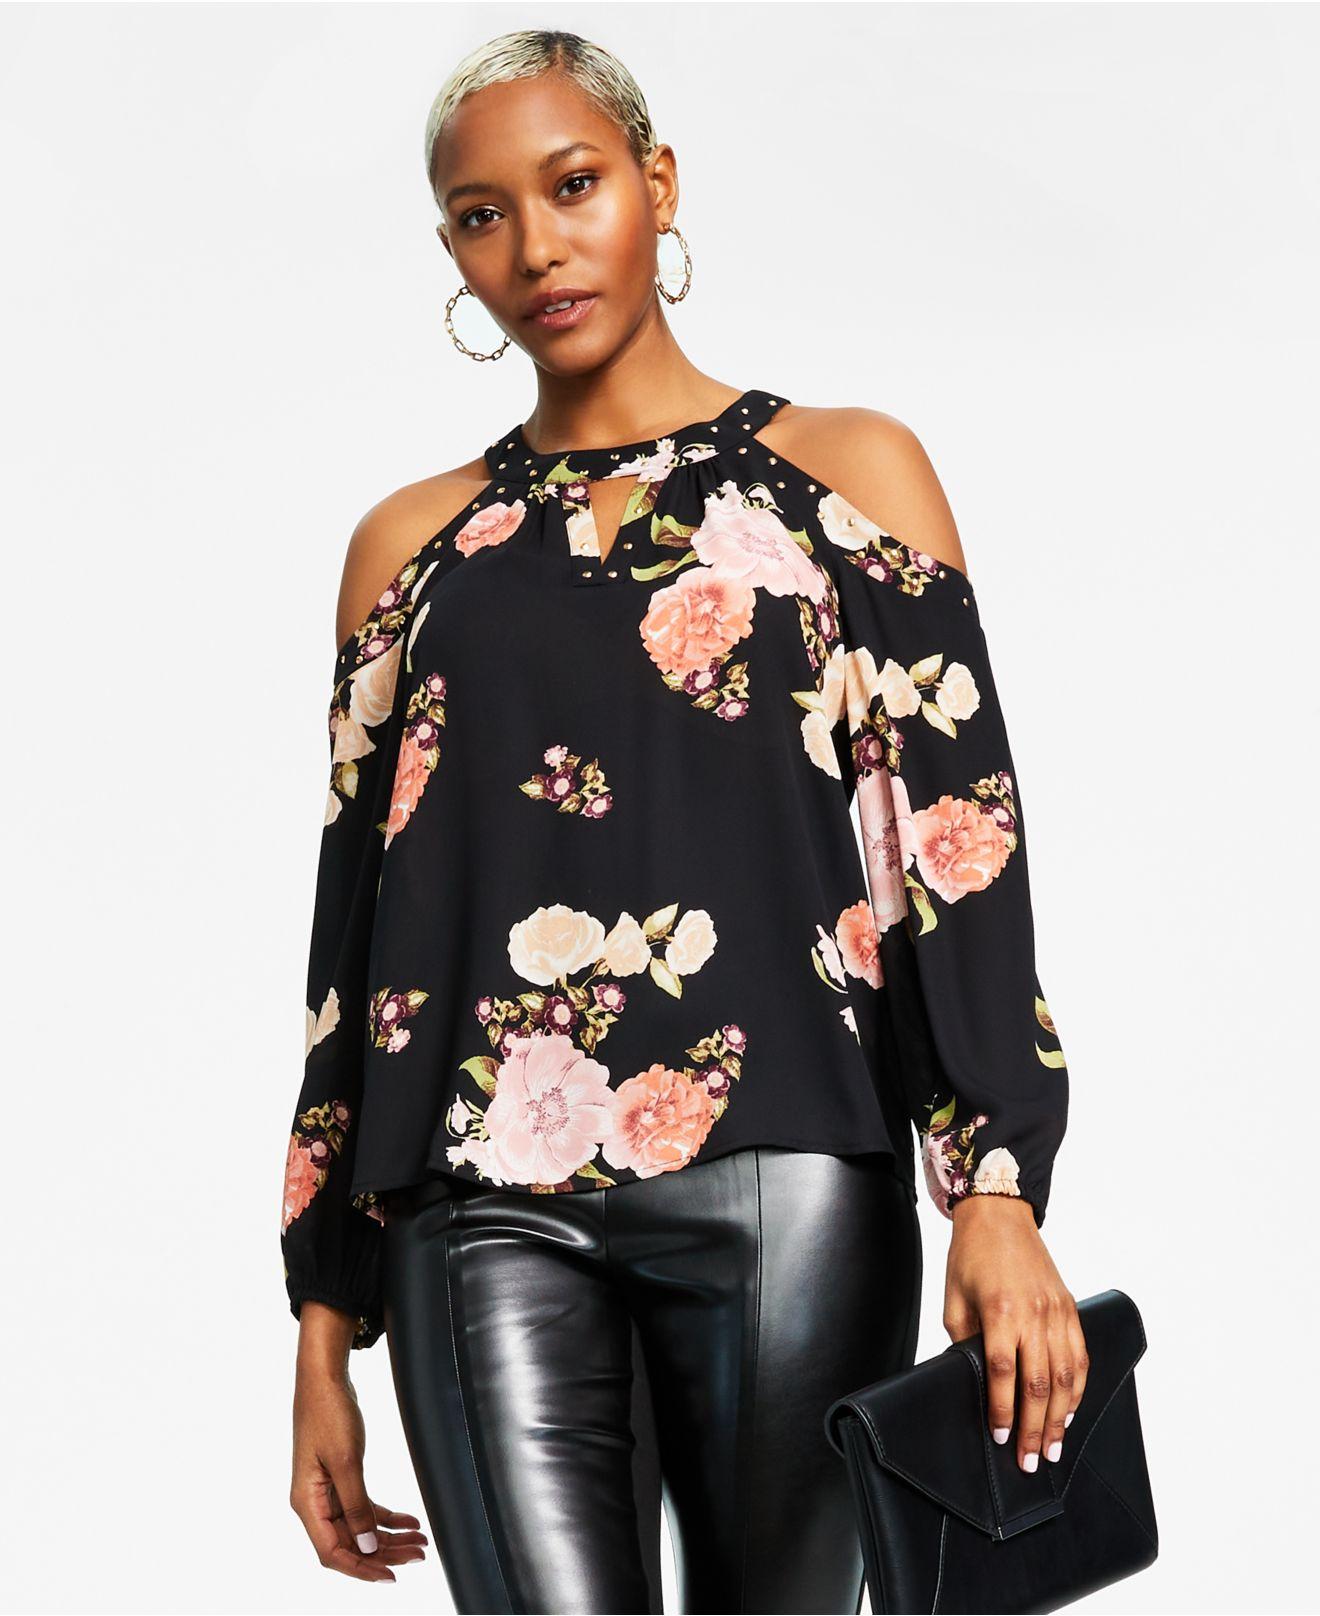 JM Collection Plus Size Garden Graphic Print Top, Created for Macy's -  ShopStyle